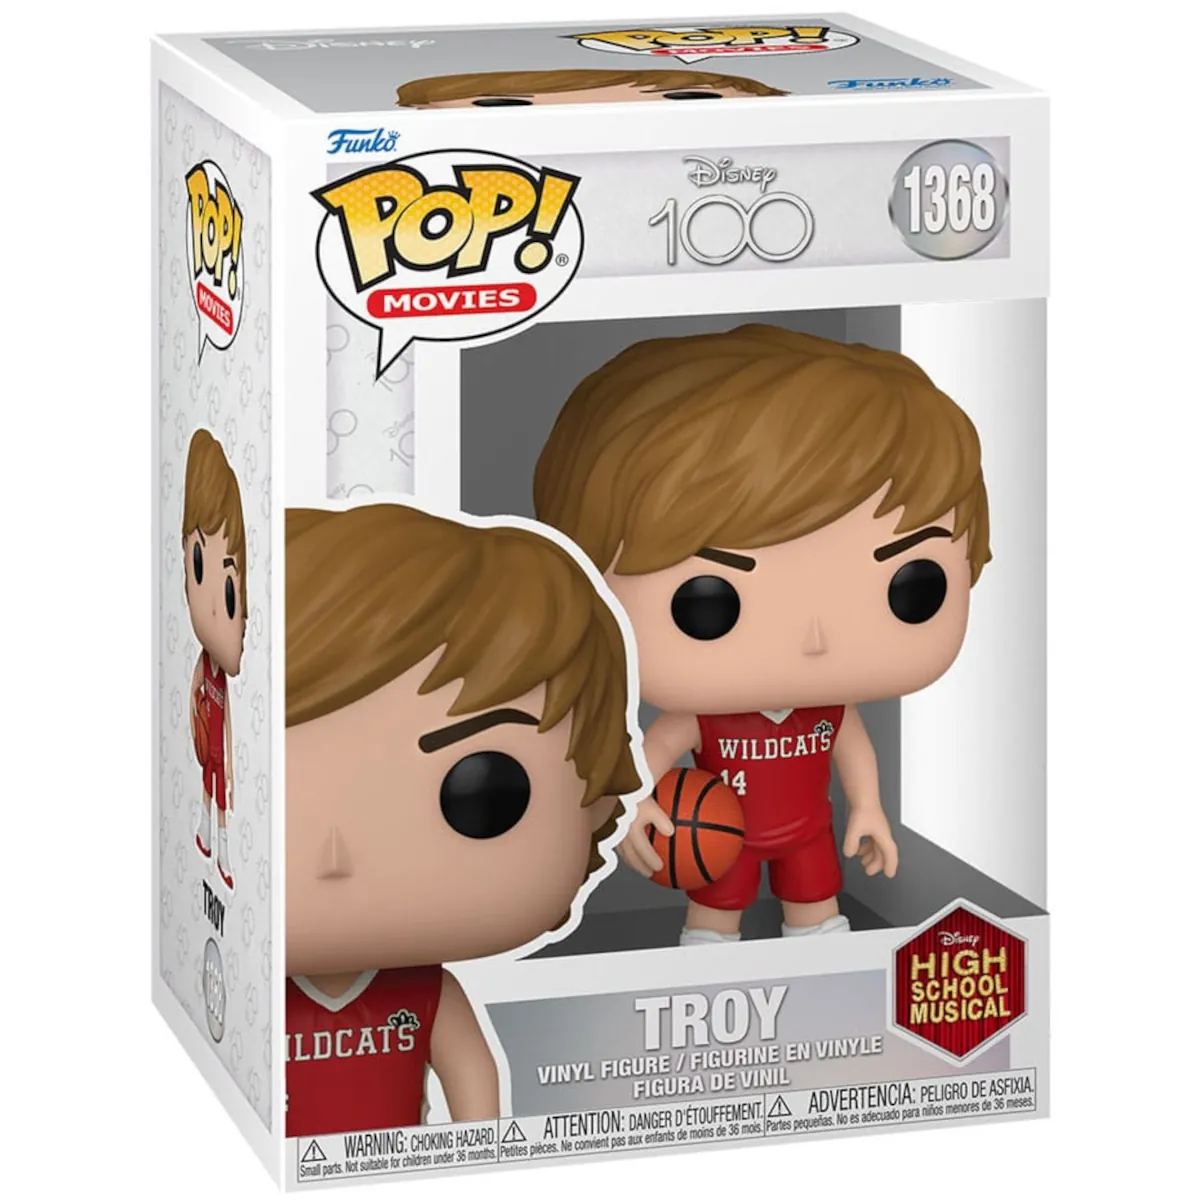 FK67992 Funko Pop! Movies - Disney High School Musical - Troy Collectable Vinyl Figure Box Front